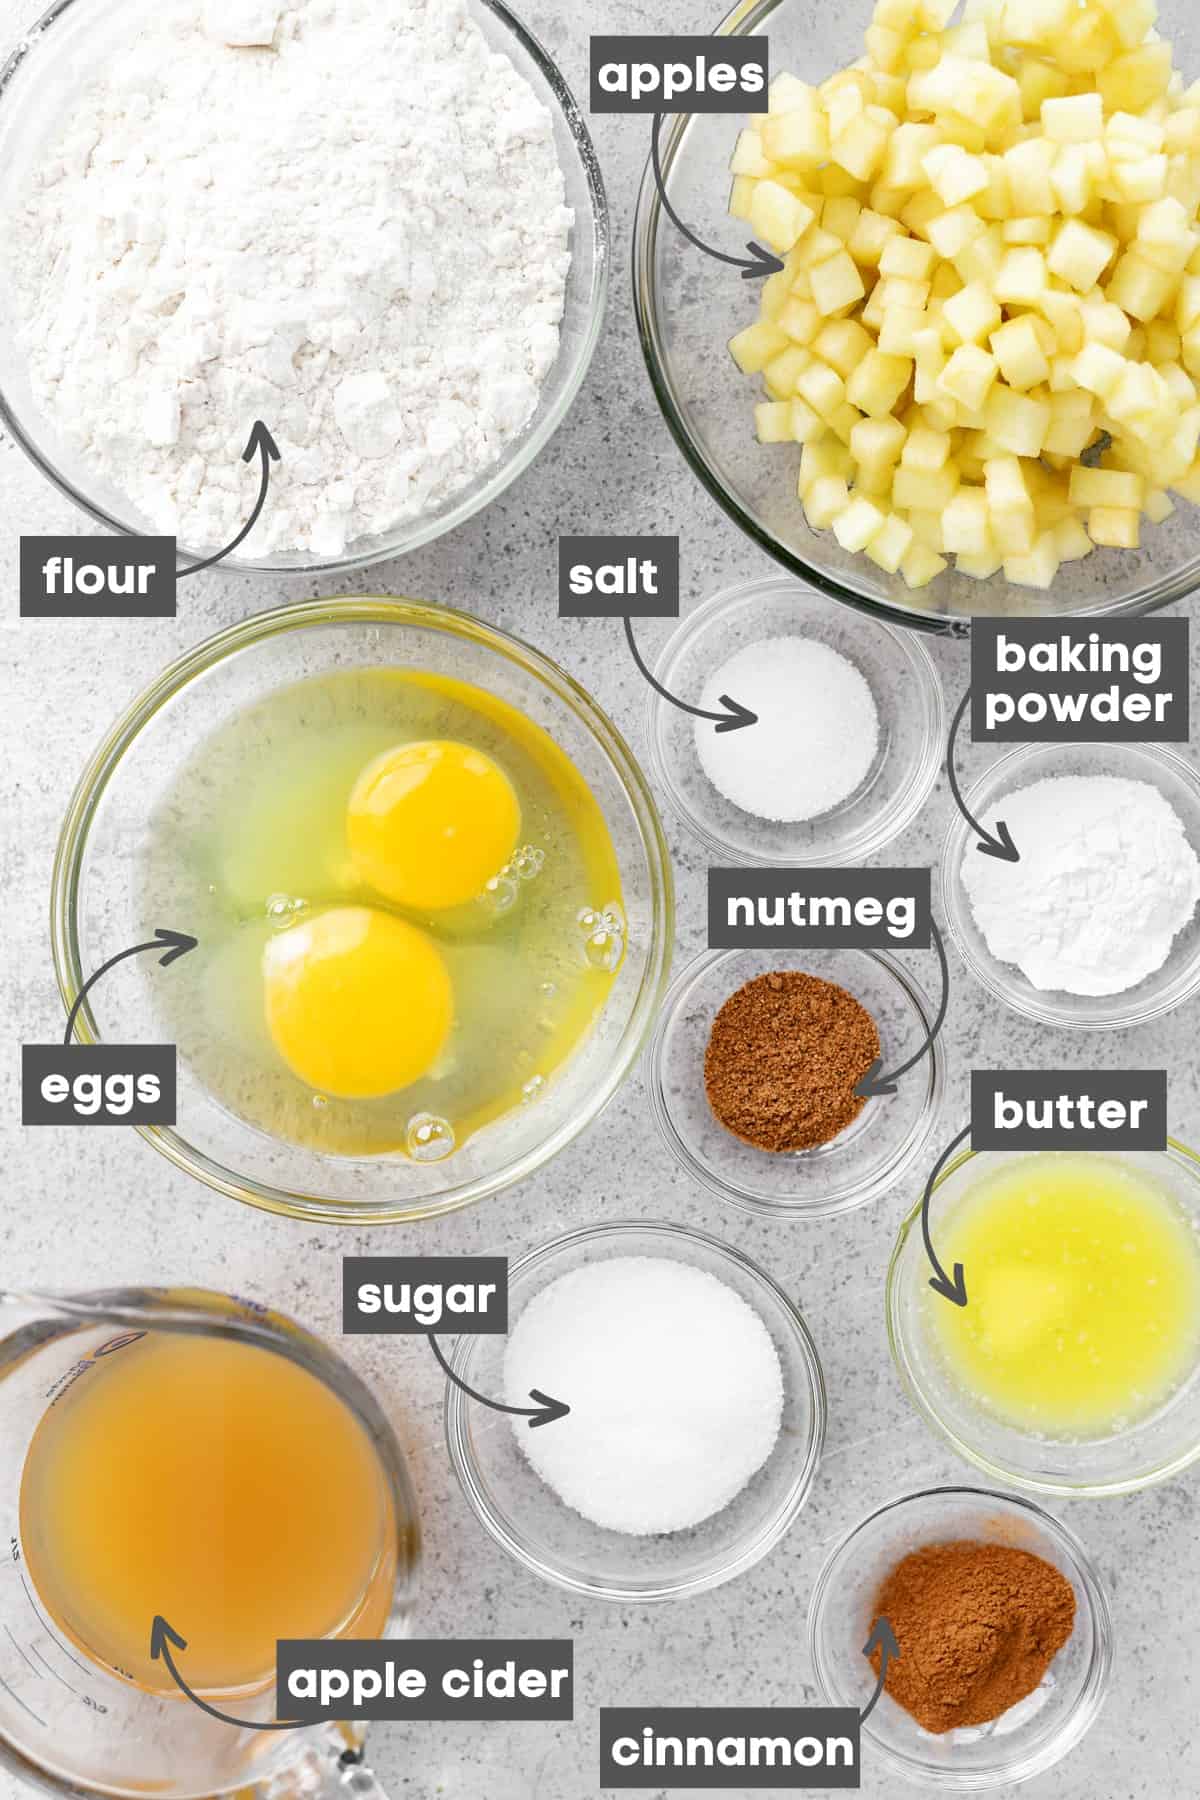 Labeled ingredients in bowls on a stainless steel countertop.